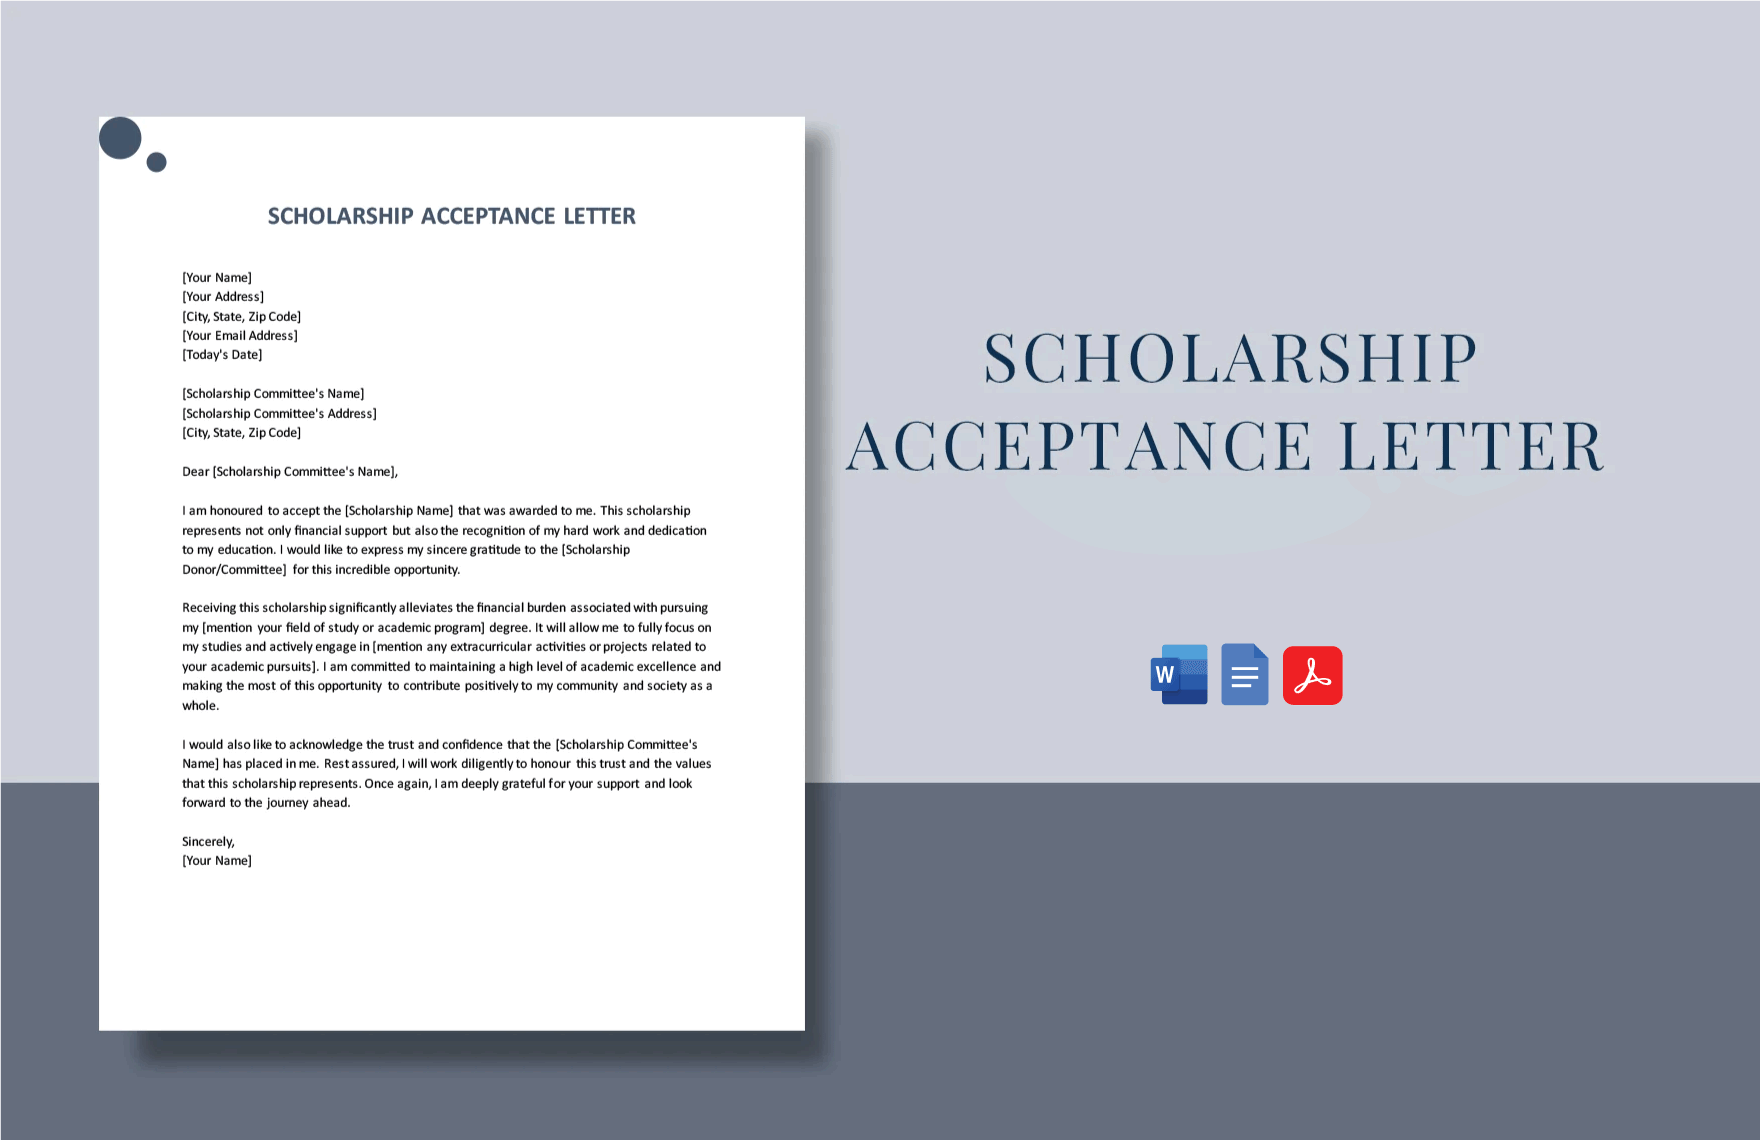 Scholarship Acceptance Letter in Word, Google Docs, PDF